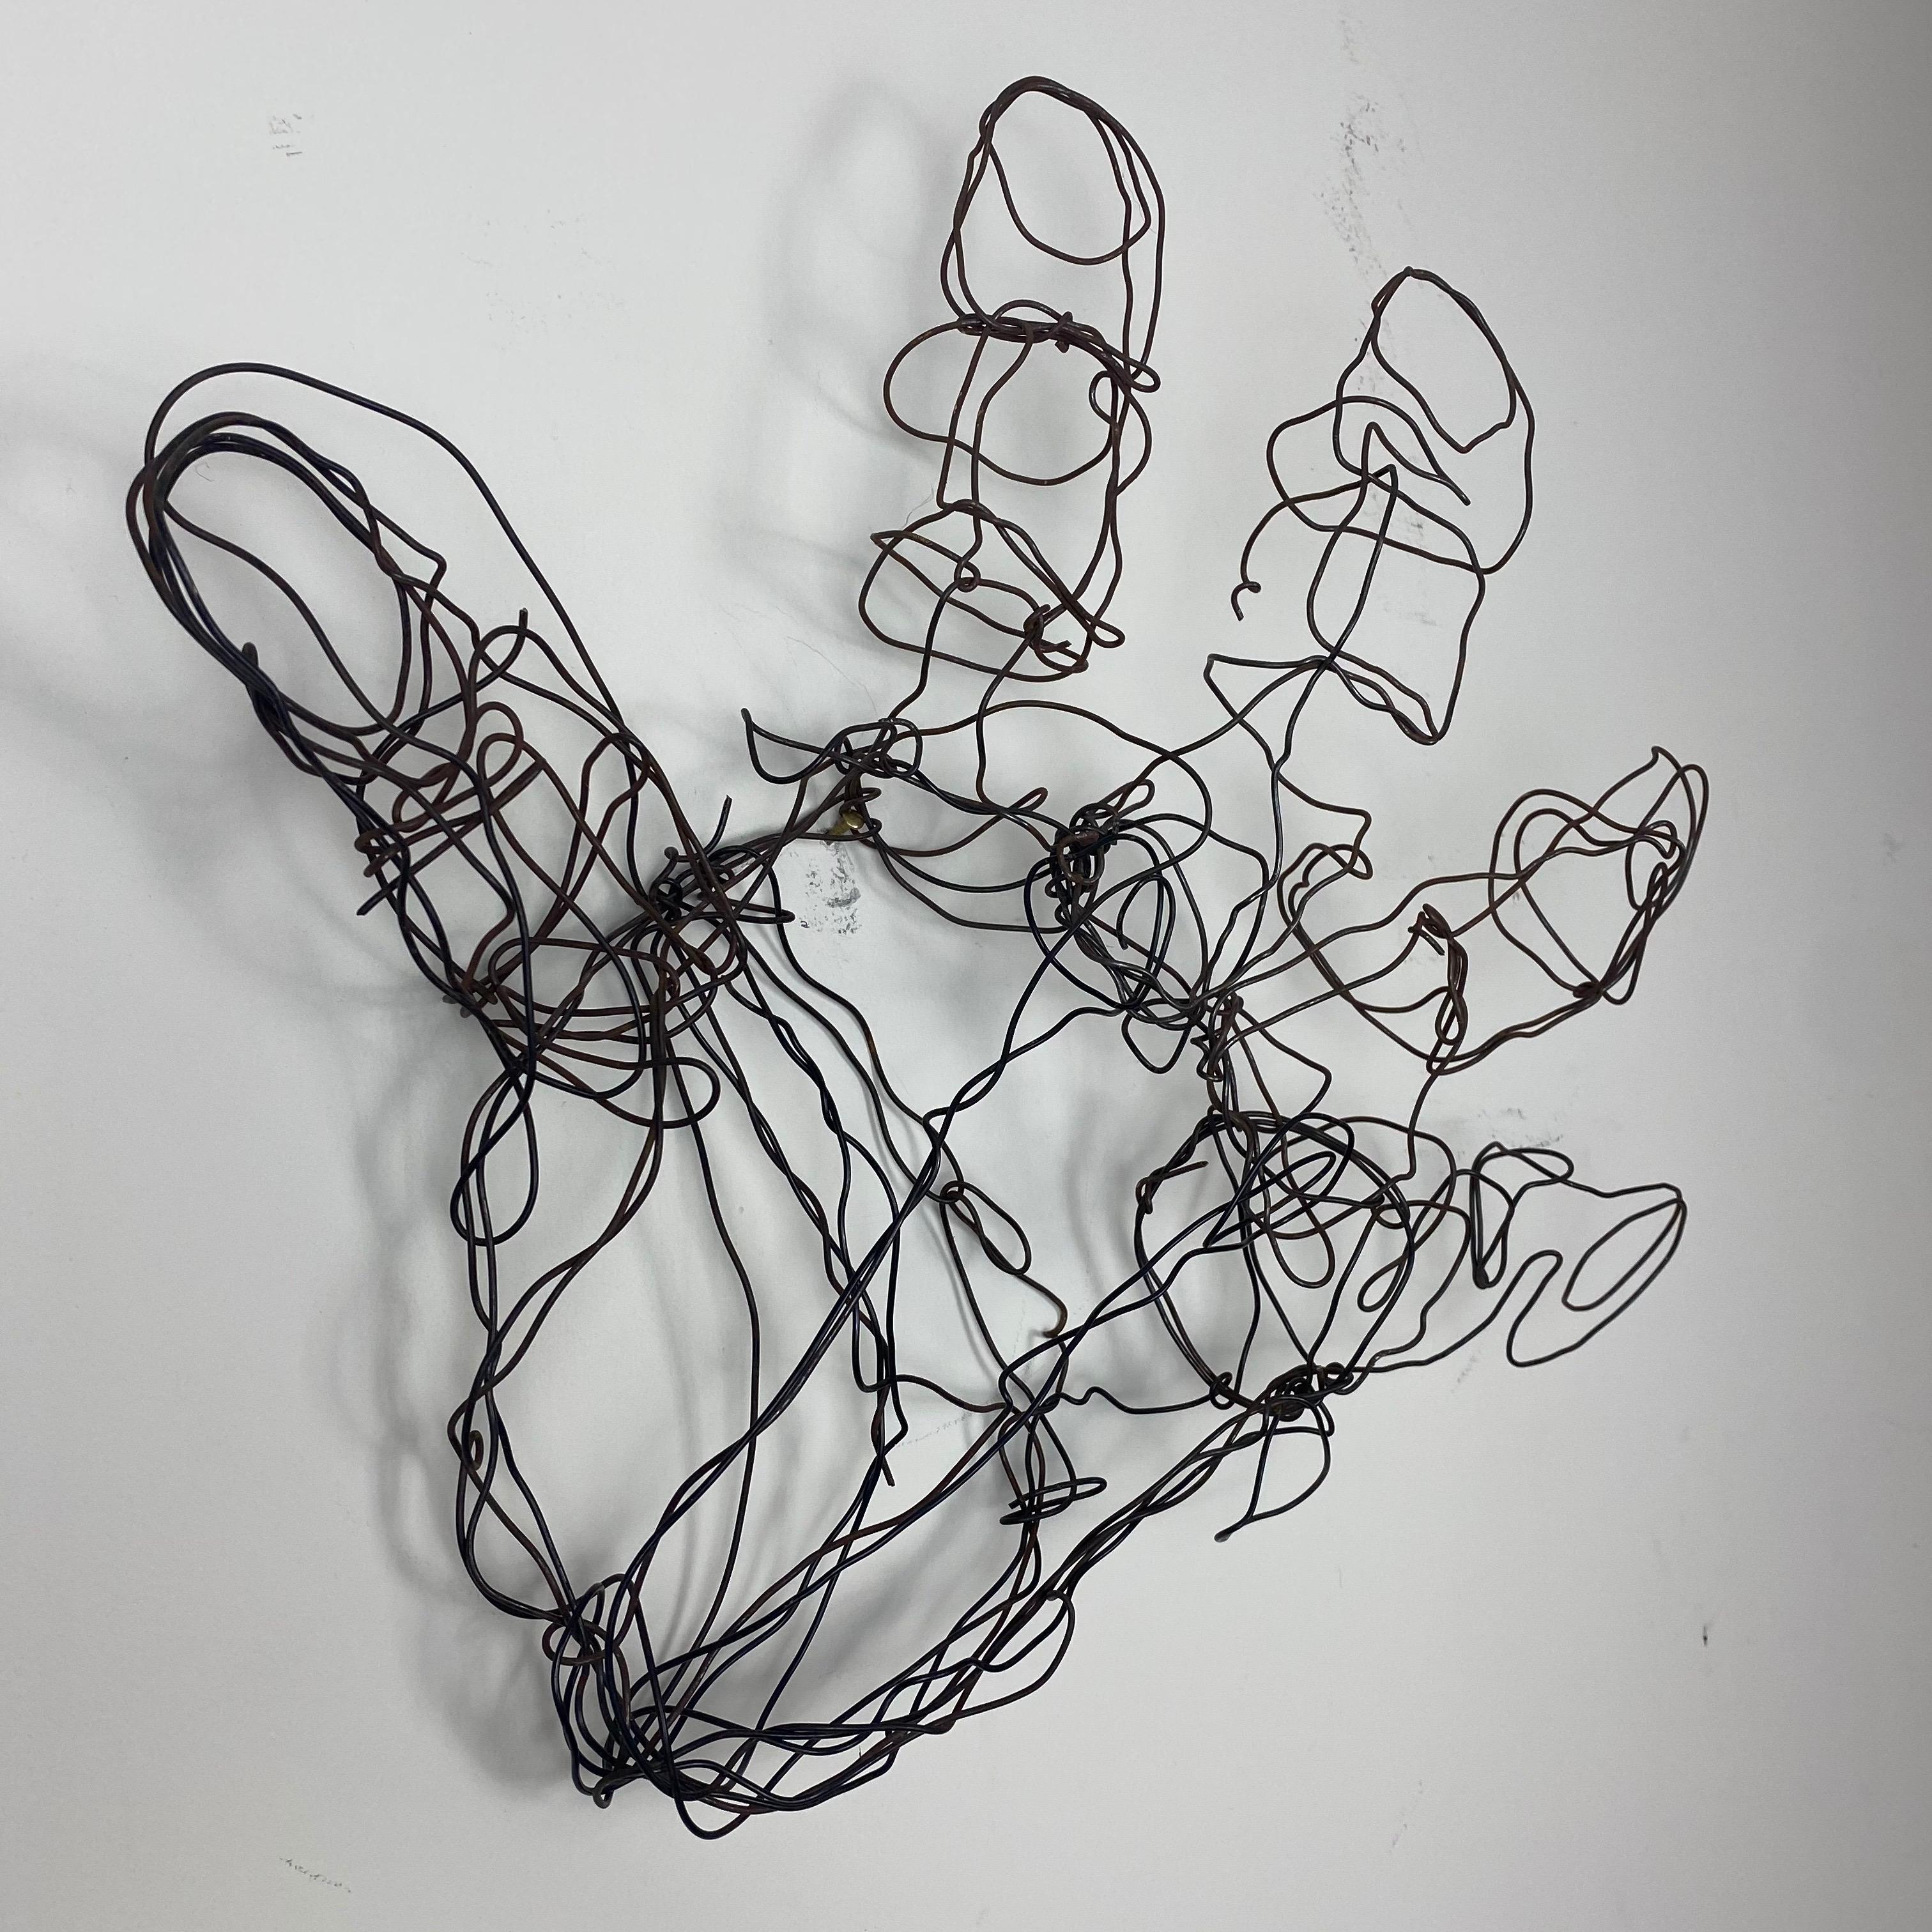 Formed wire abstract wire hand sculpture. A light patina has formed on the steel wire giving this abstract sculpture and warm appearance. Can be wall-mounted or simply rest on a surface.